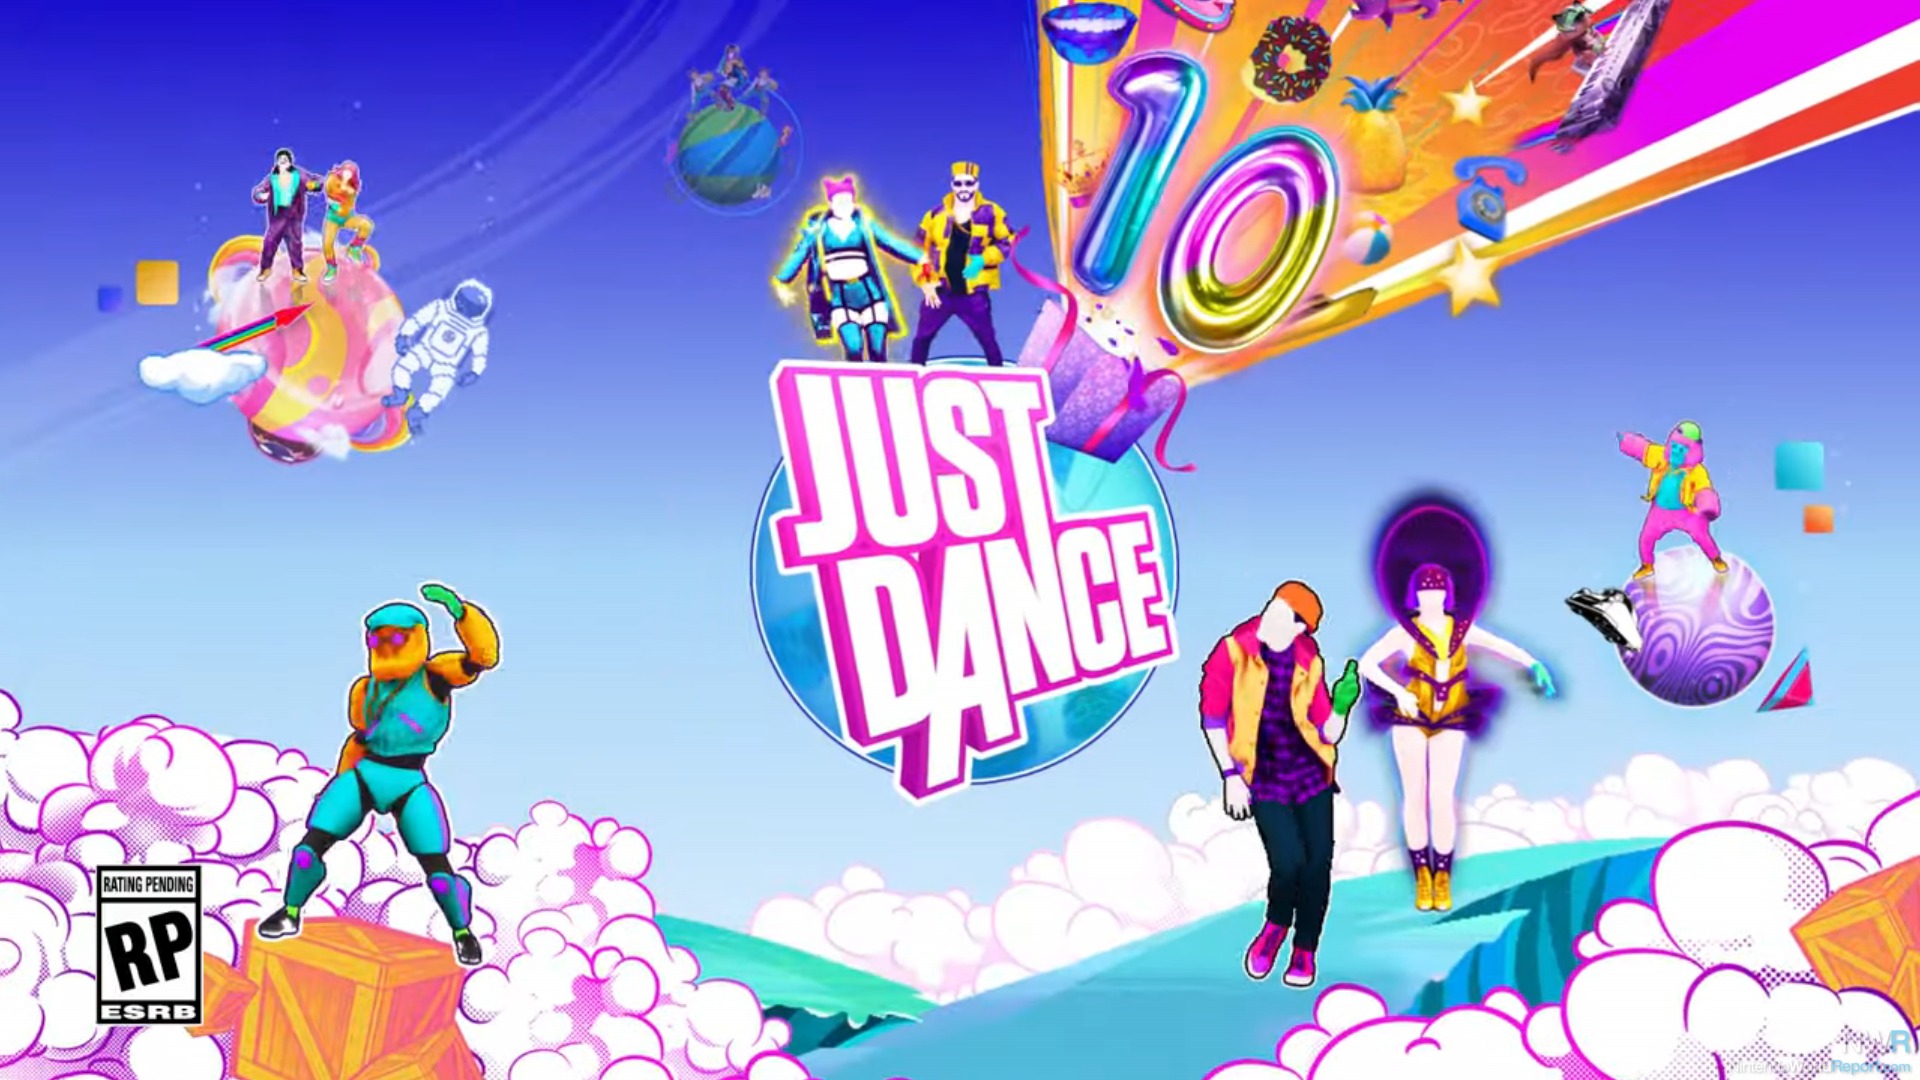 Just Dance 2020 Announced For Switch And Wii - News - Nintendo World Report